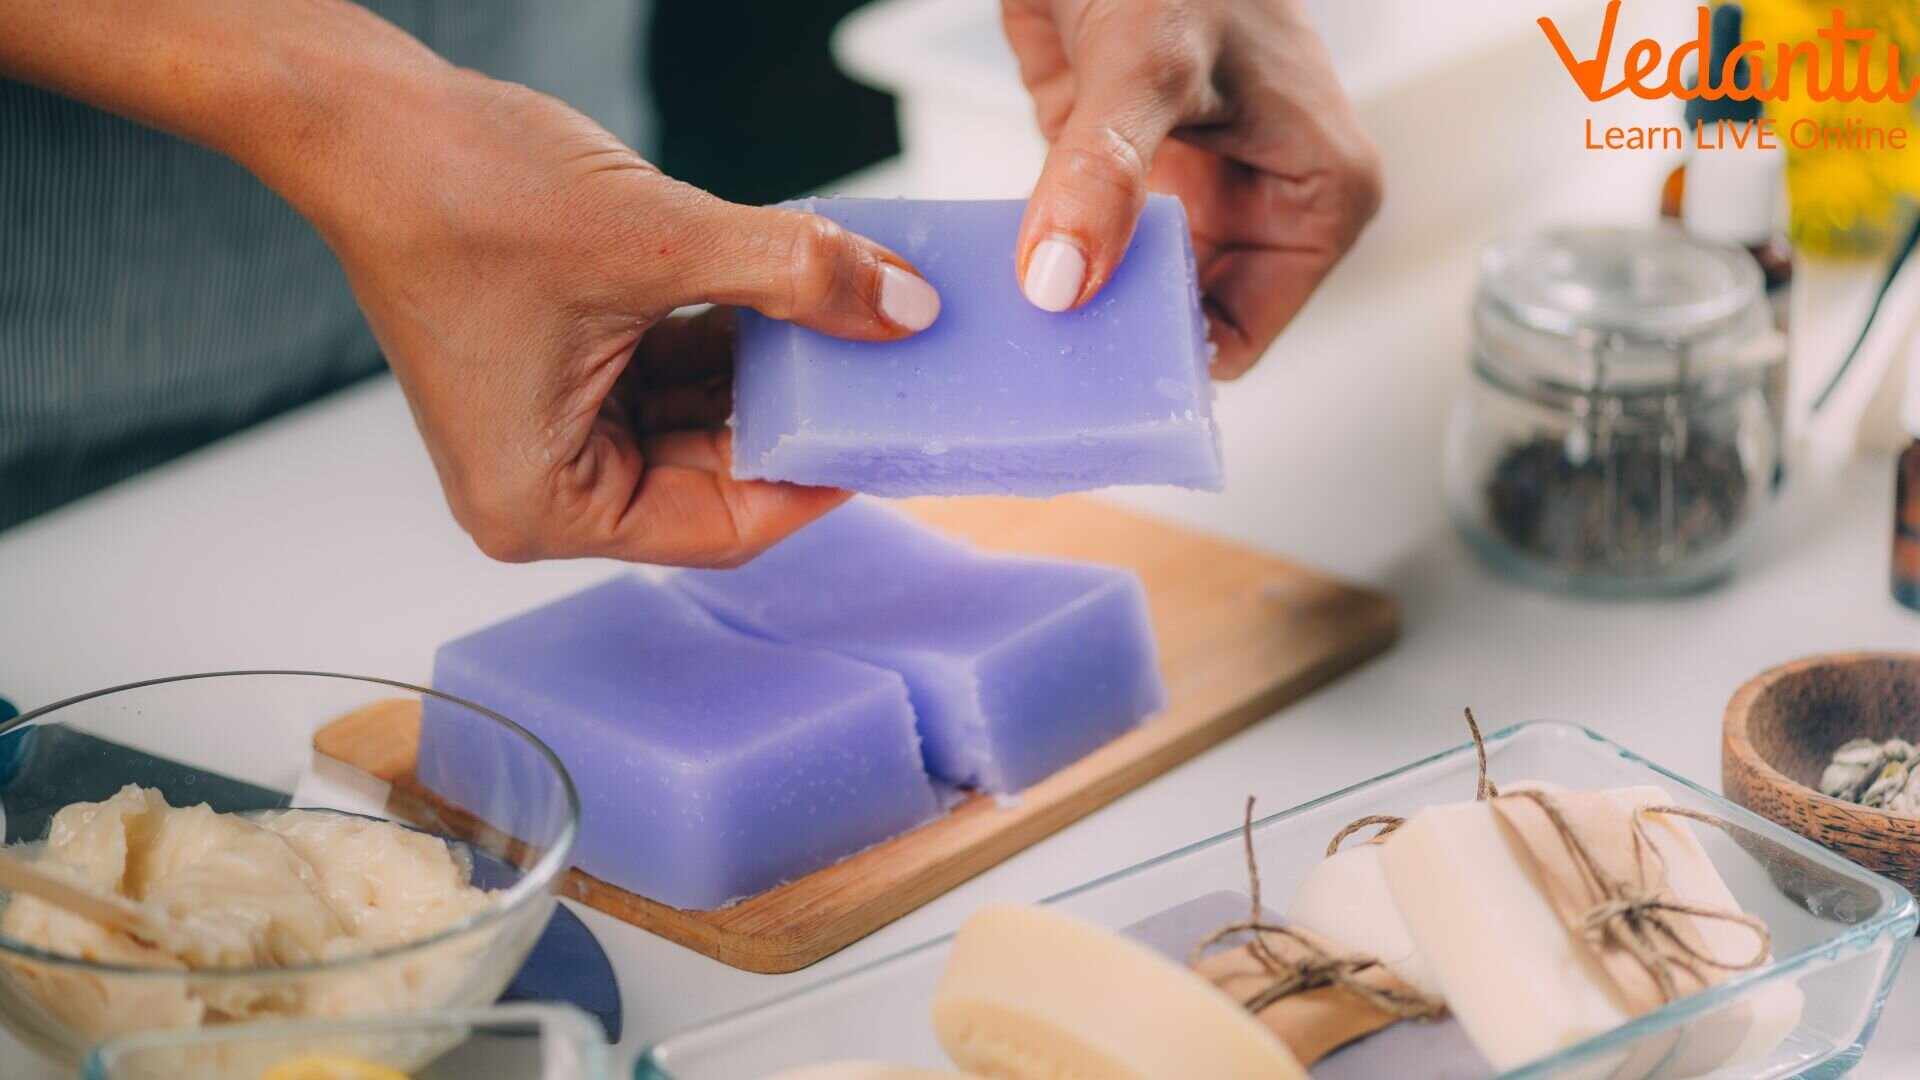 Easy Steps To Make Soap At Home